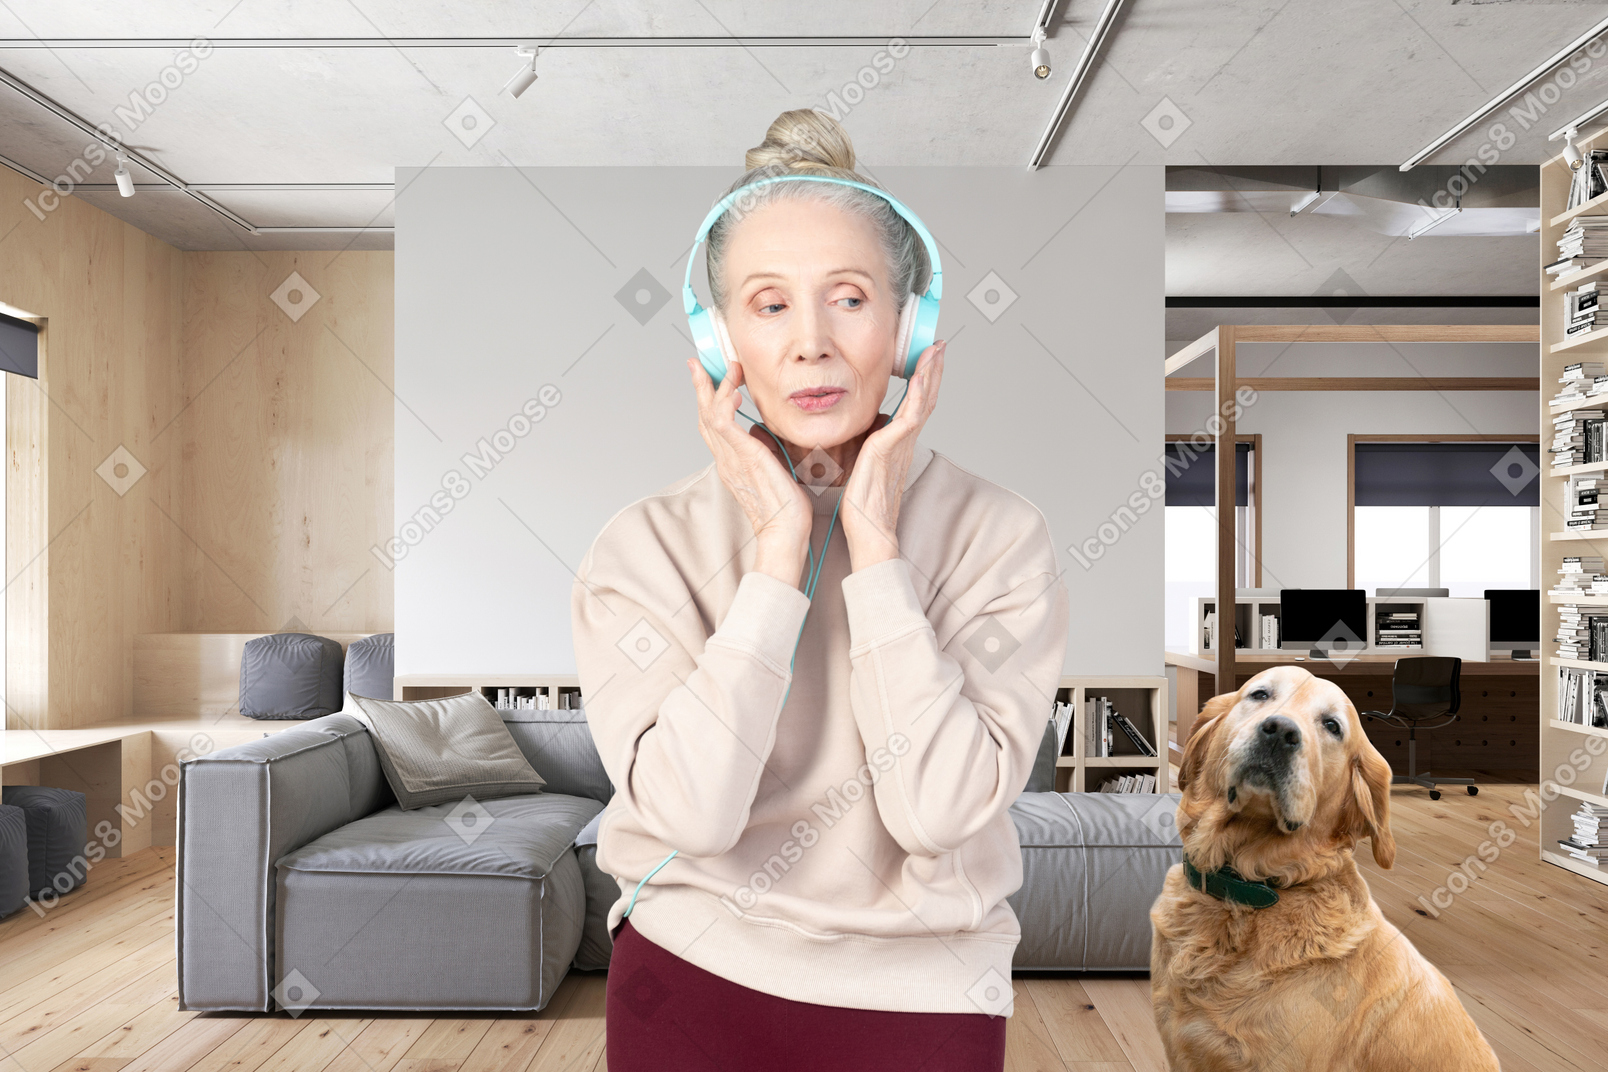 A woman with headphones on standing next to a dog